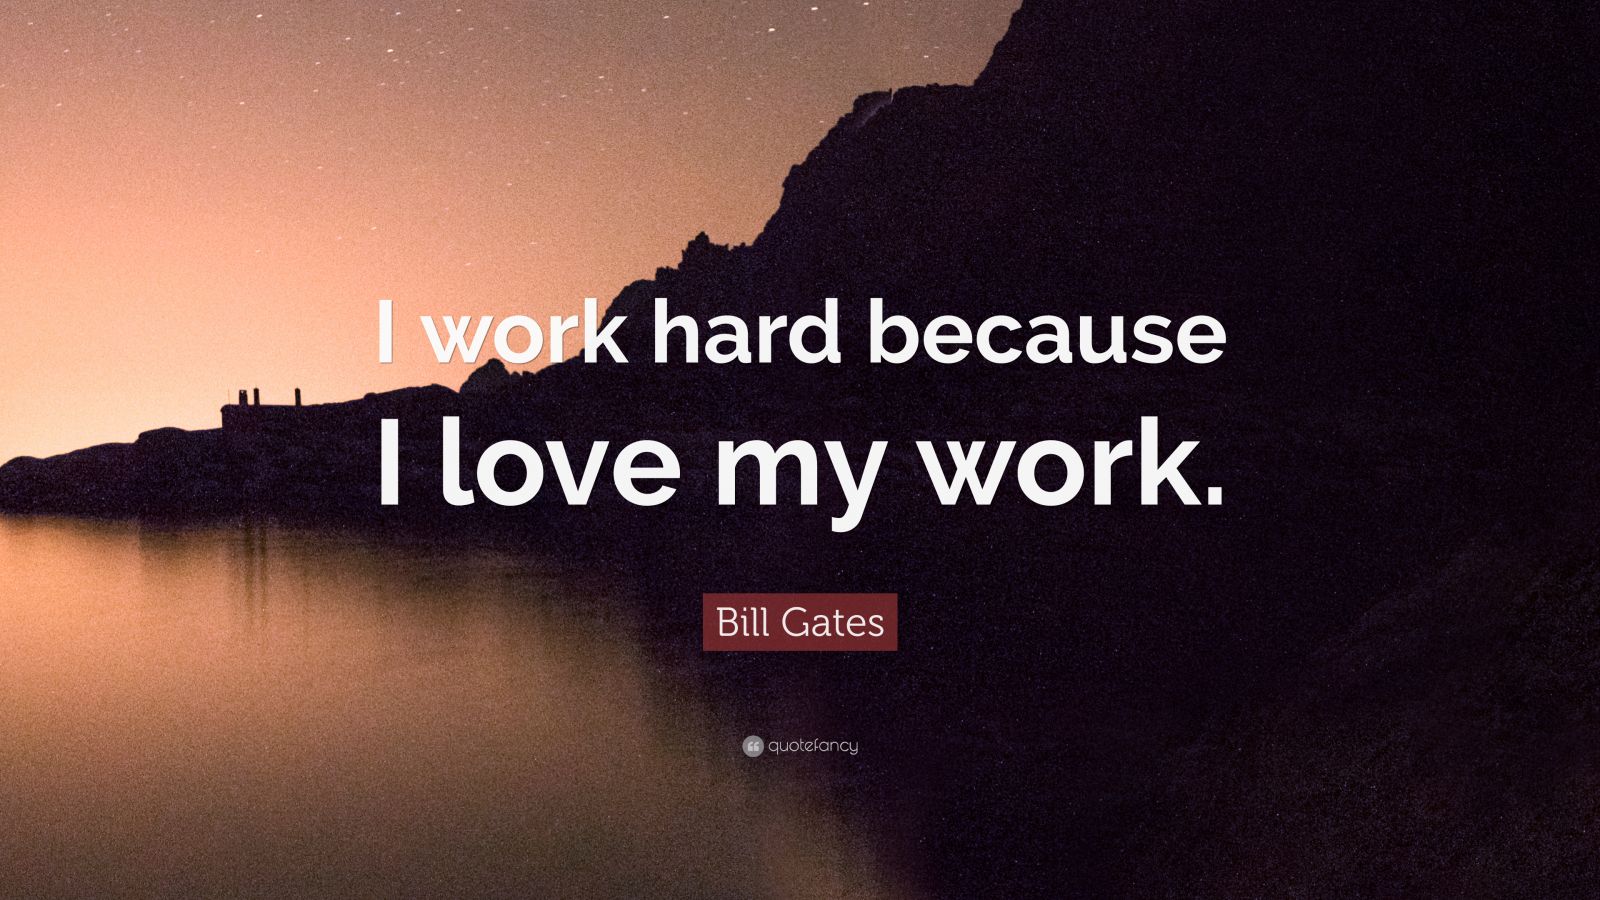 Bill Gates Quote: “I work hard because I love my work.” (12 wallpapers